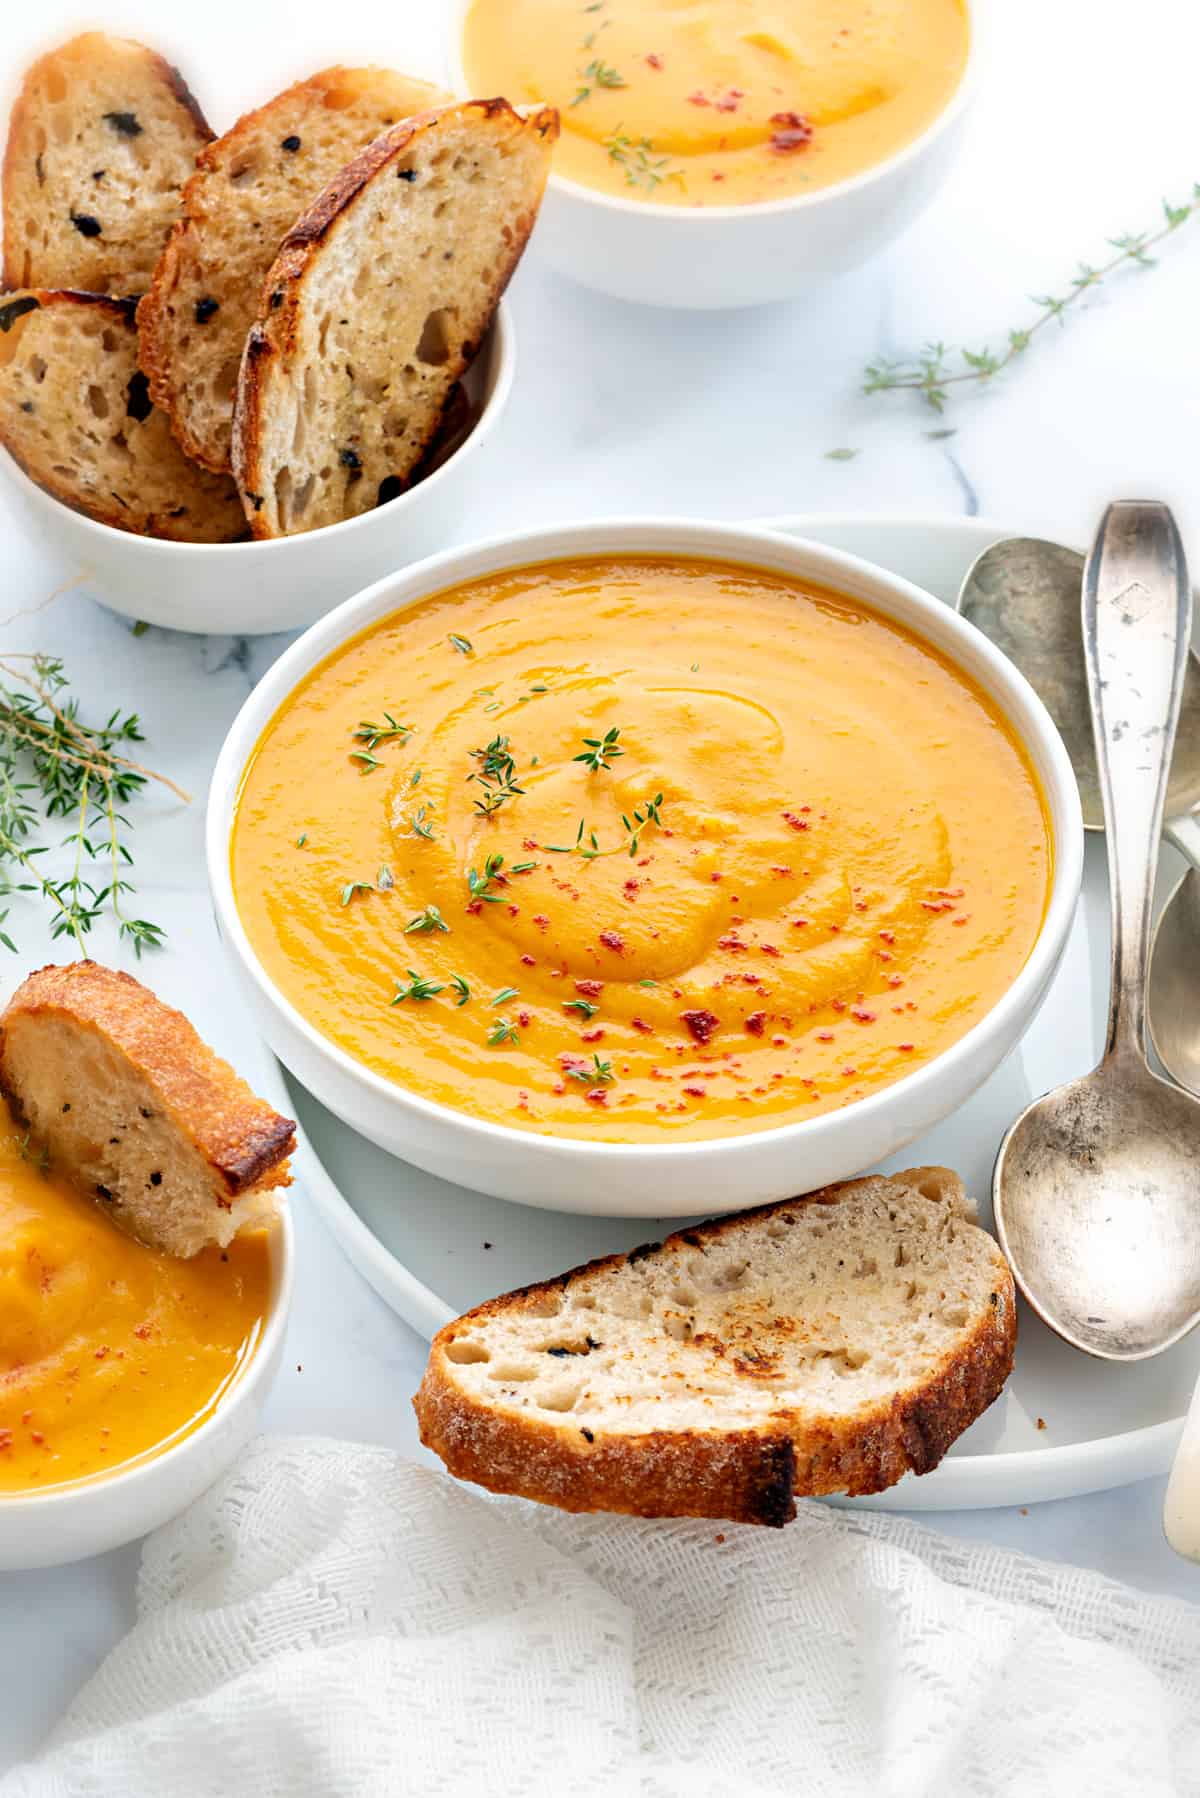 Curried butternut squash soup in white bowl with bread on side.